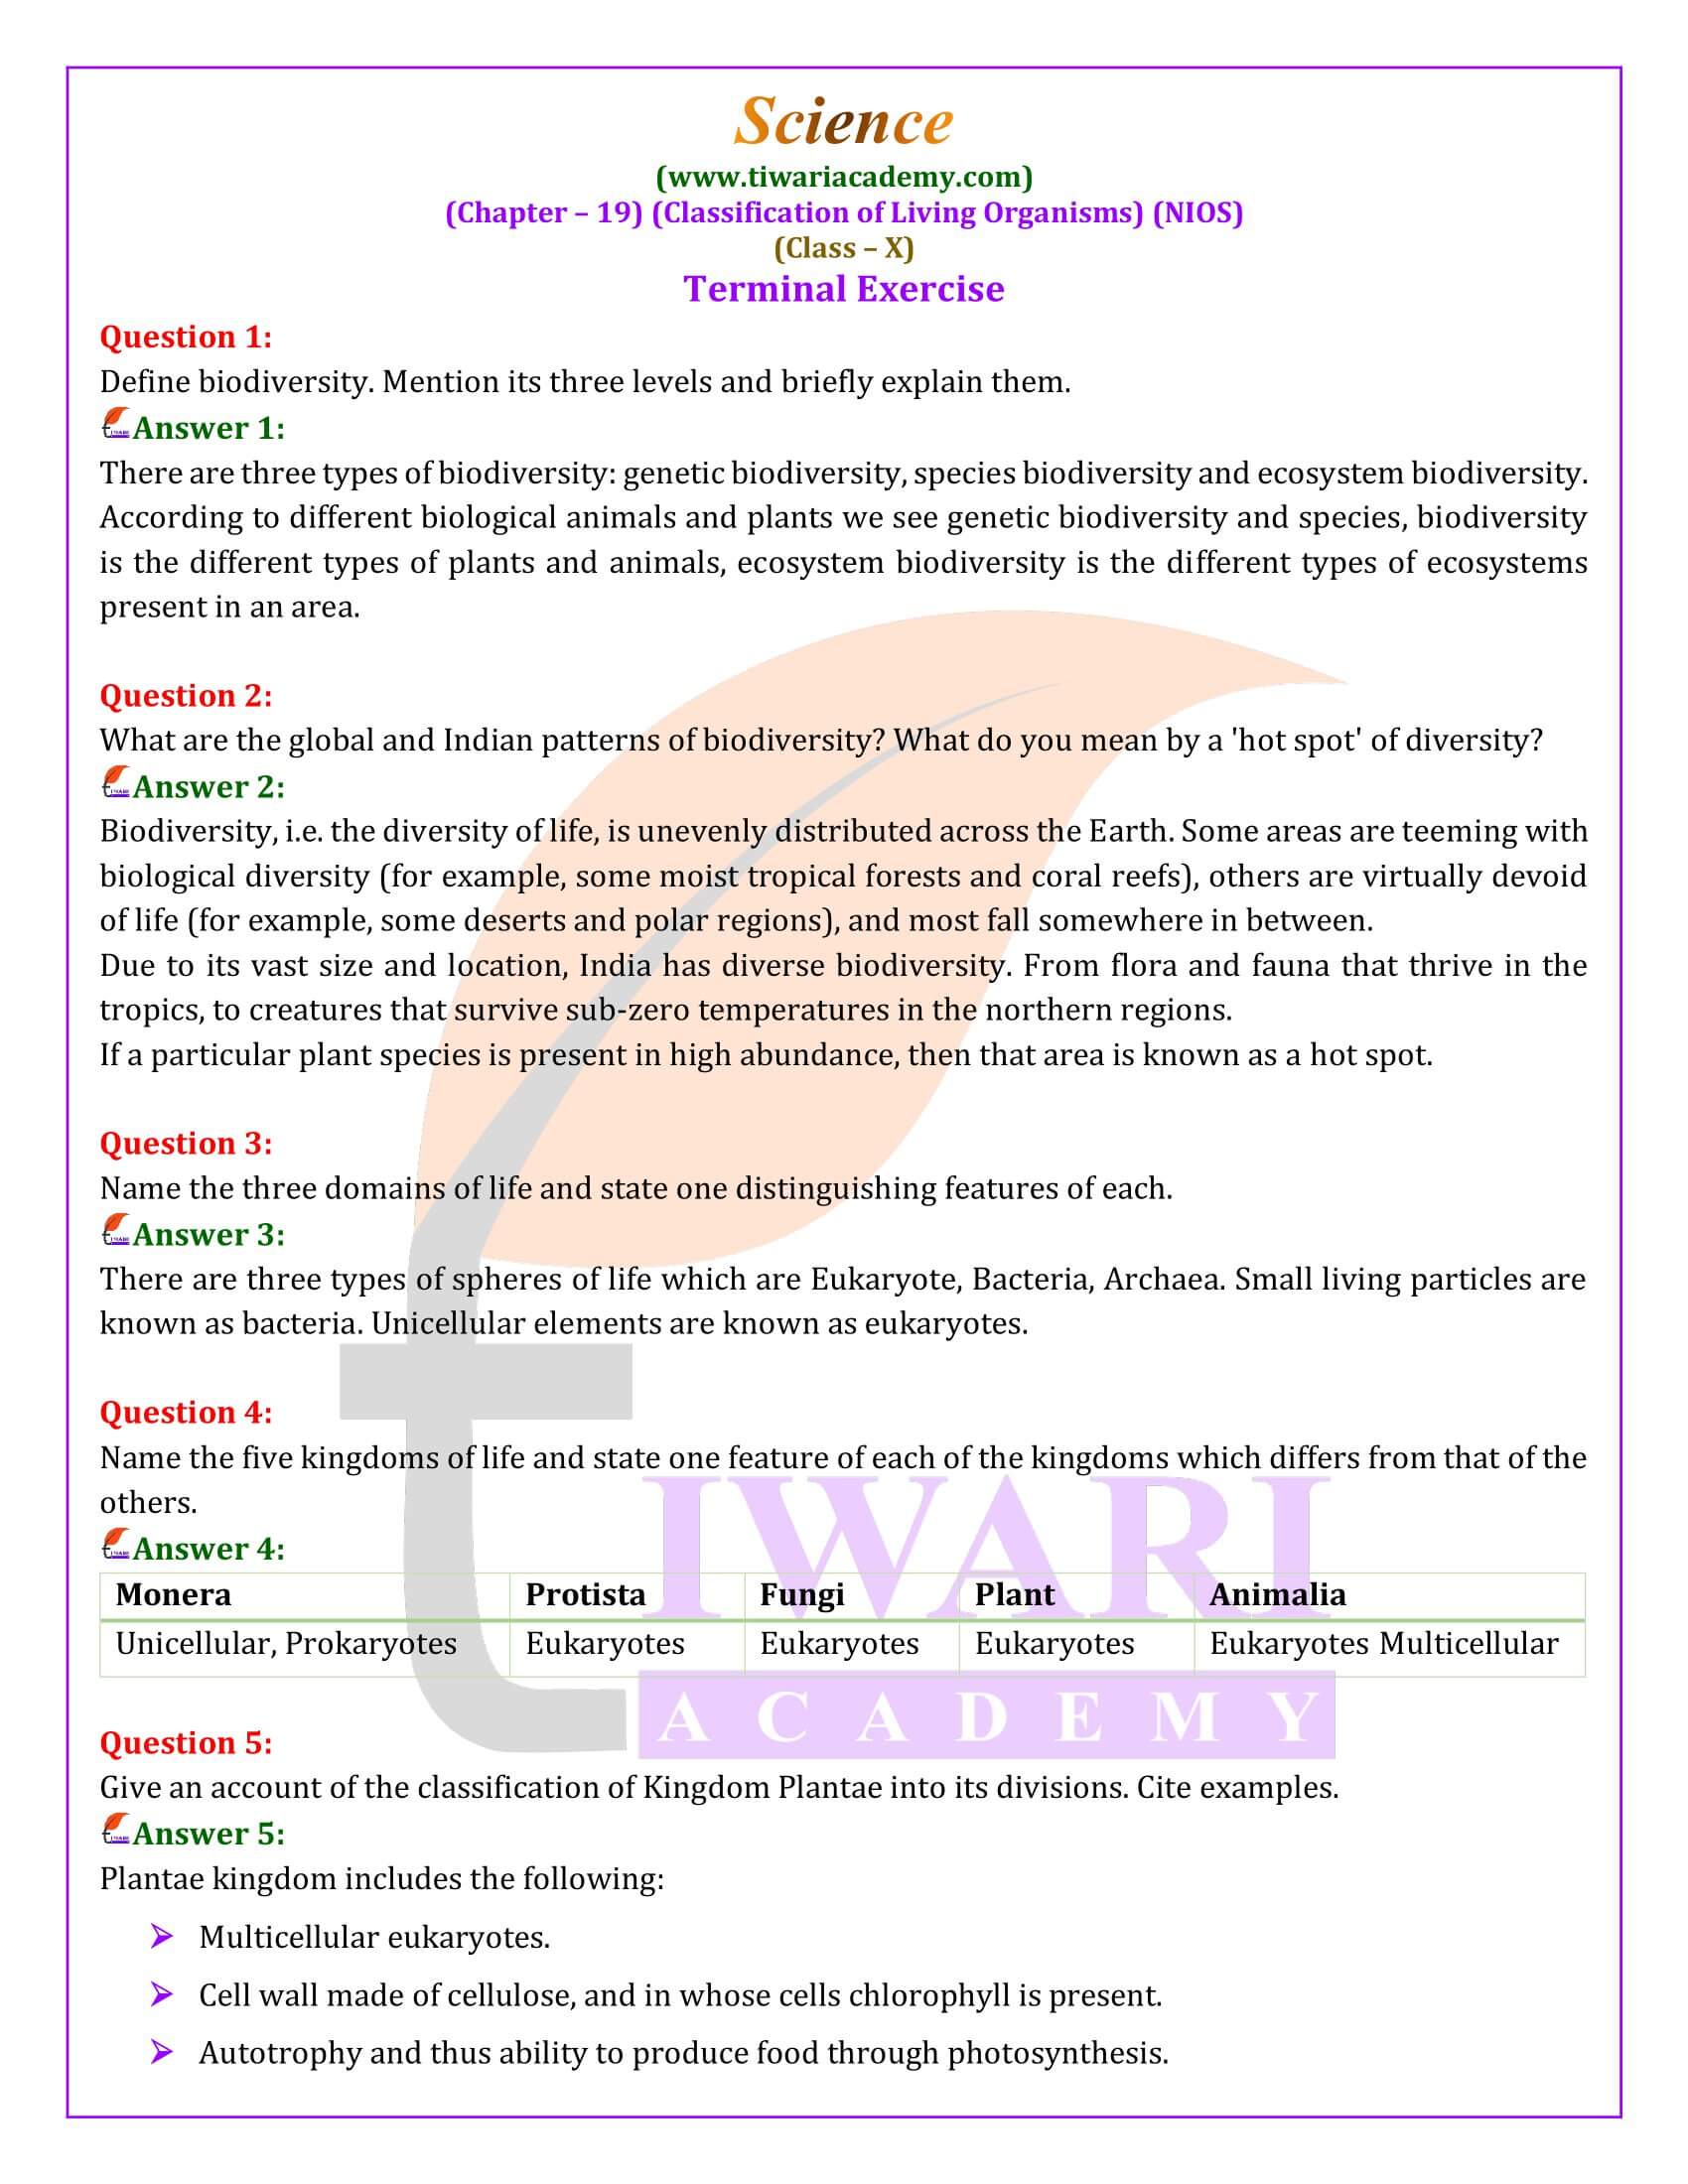 NIOS Class 10 Science Chapter 19 Guide in English